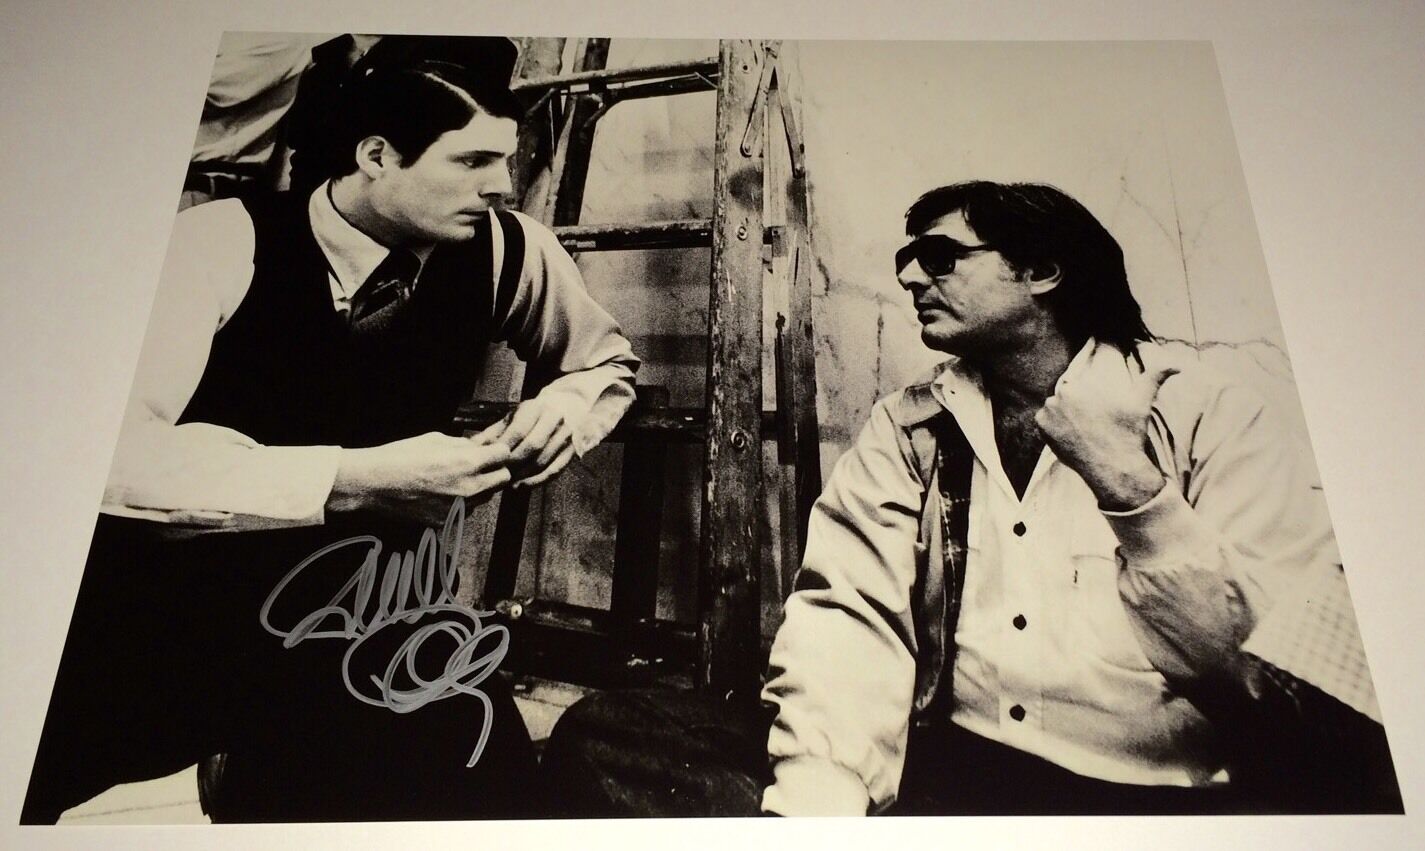 Richard Donner SUPERMAN Signed 11 X 14 Photo Poster painting Authentic IN PERSON PROOF